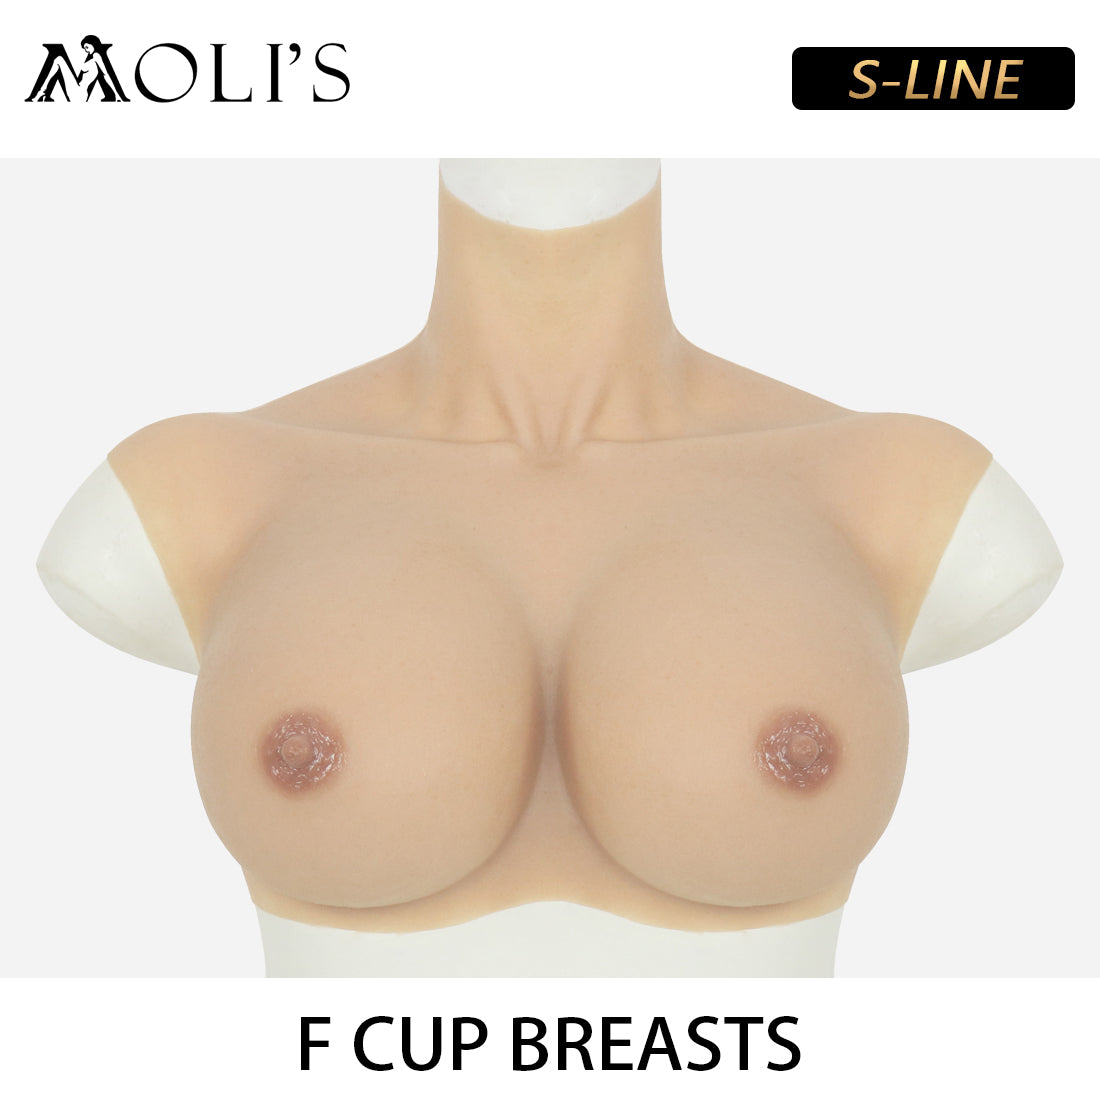 S-LINE | NEW F CUP SILICONE BREASTS ENHANCED DETAILS